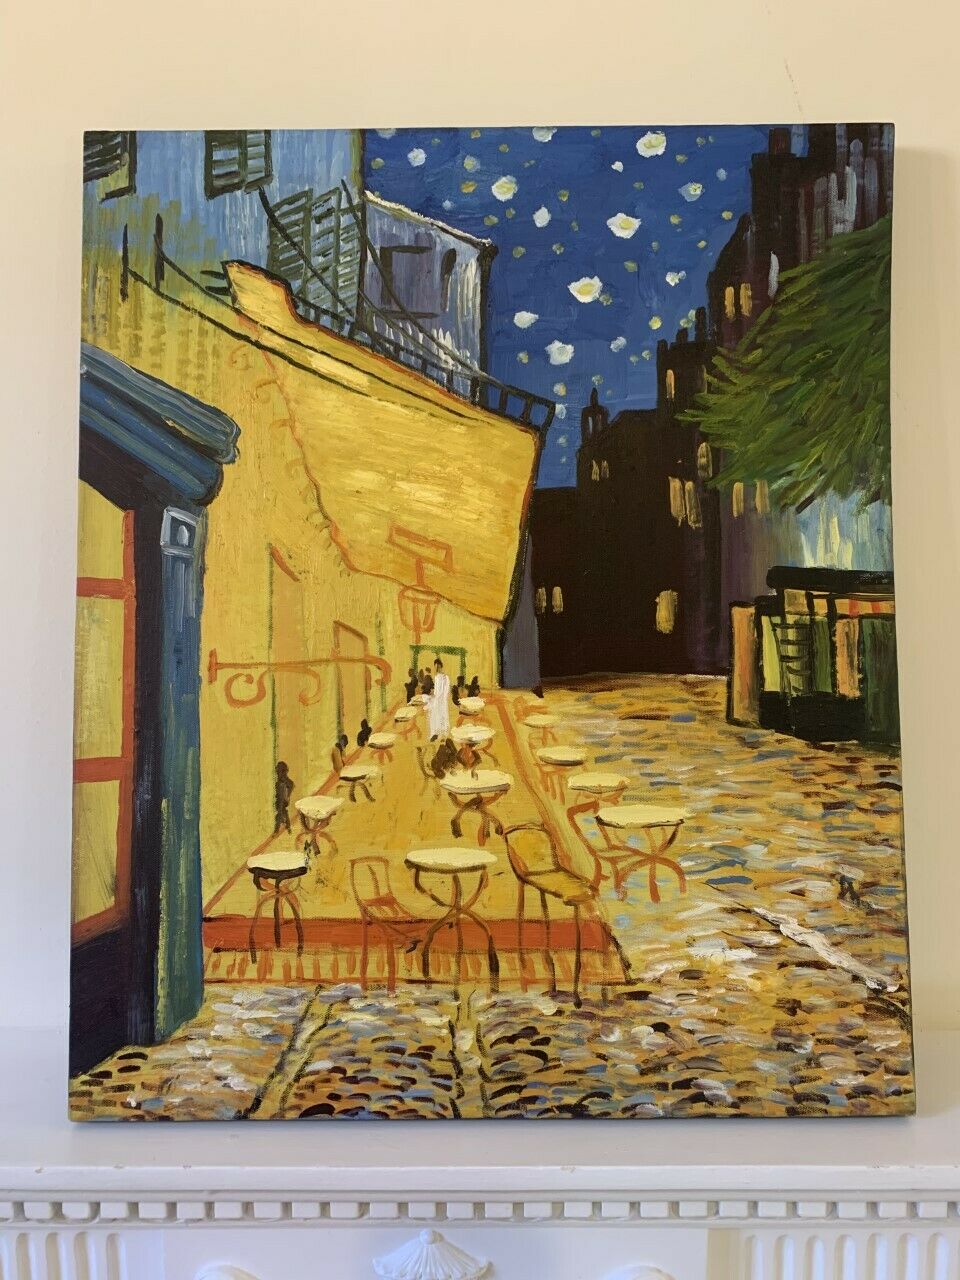 Framed 50 x 60cm Oil Painting Canvas Wall Art Van Gogh Cafe Repro Ready to Hang